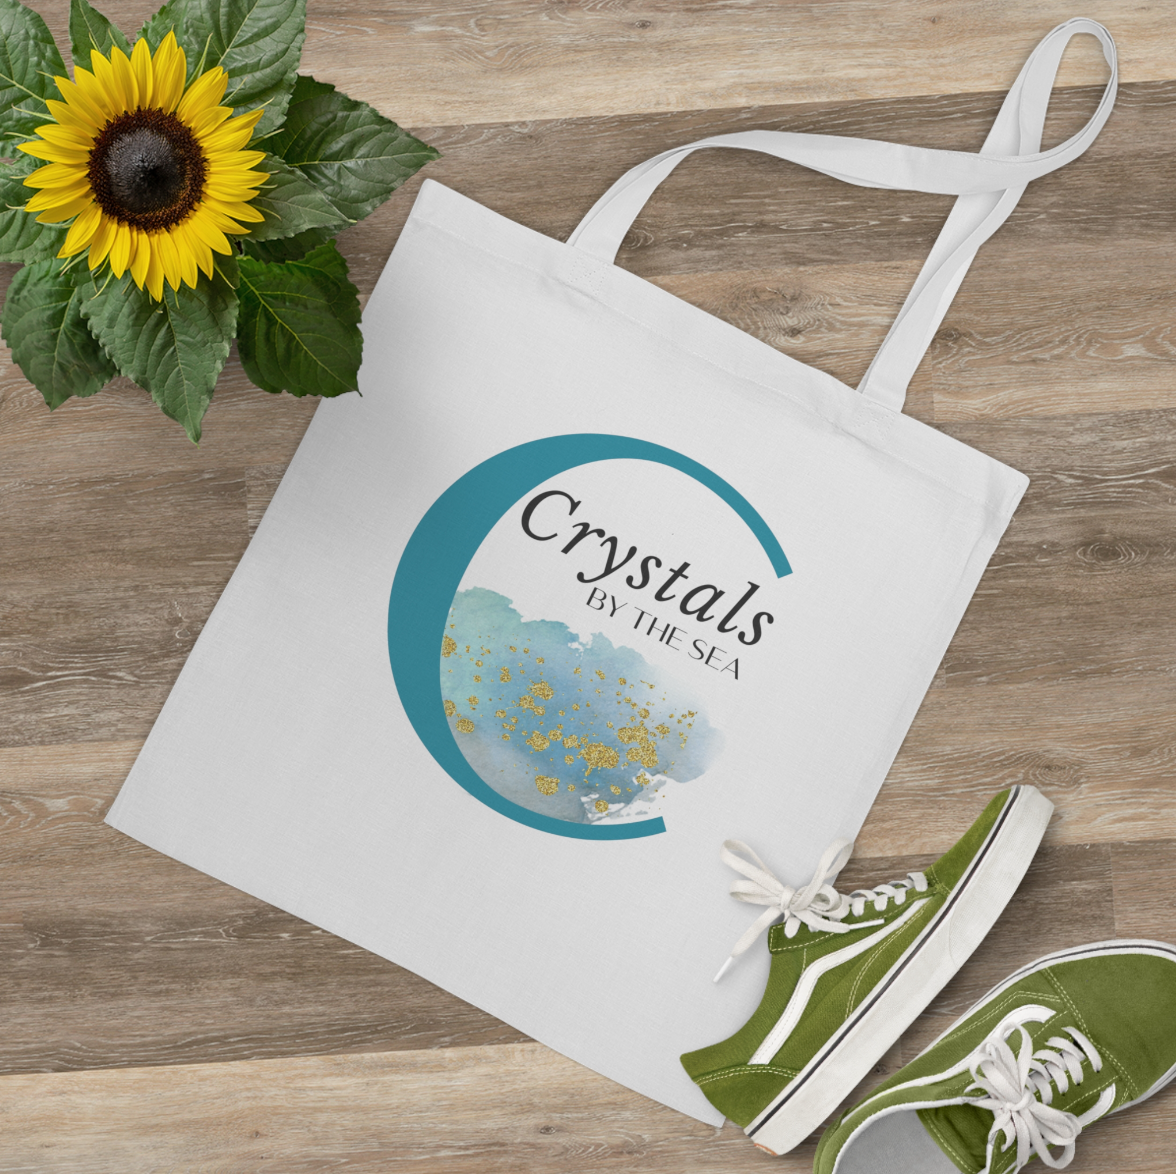 Crystals by the Sea SMALL White Canvas Tote Bag: Carry Your Intentions in Style at your Next Book Club